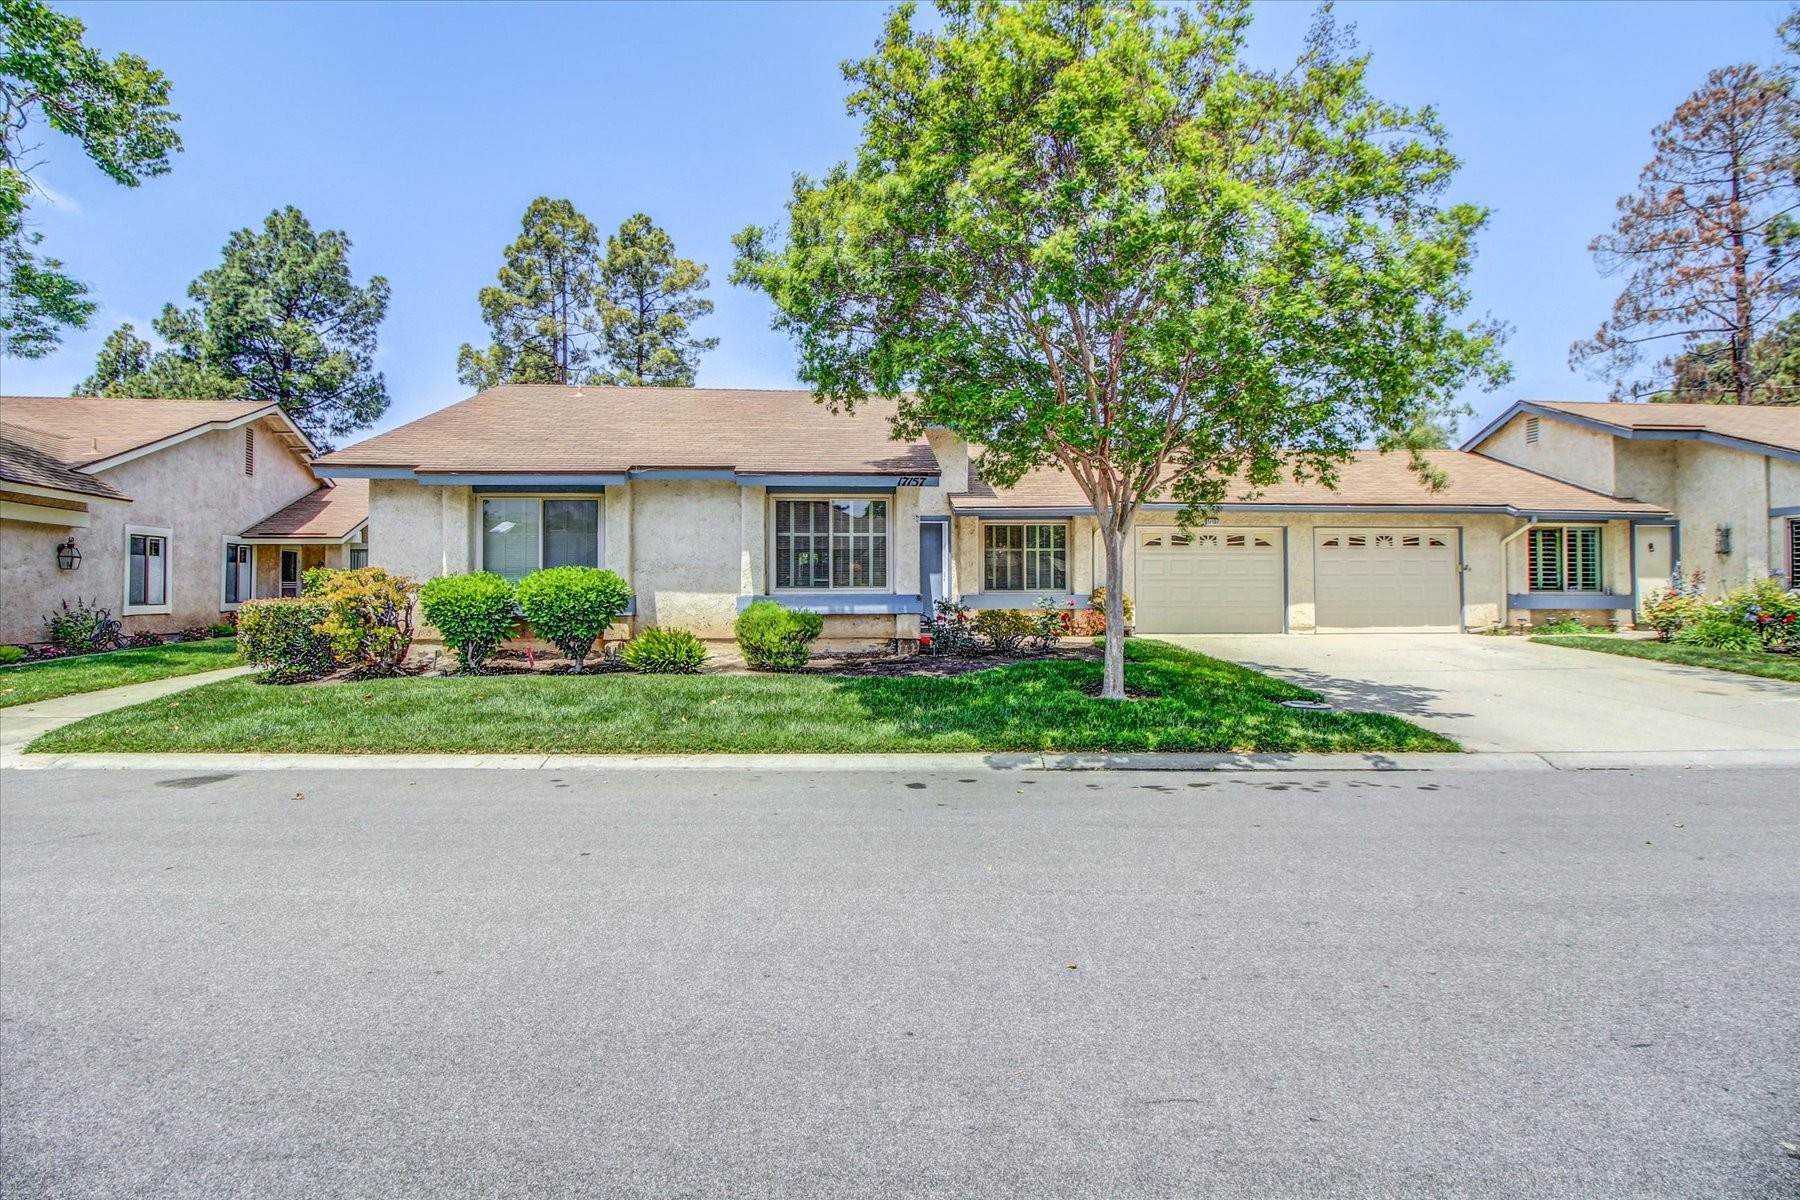 Townhouse for Sale at Lovely Leisure Village Home Lovely Leisure Village Home, Camarillo, California 93012 United States